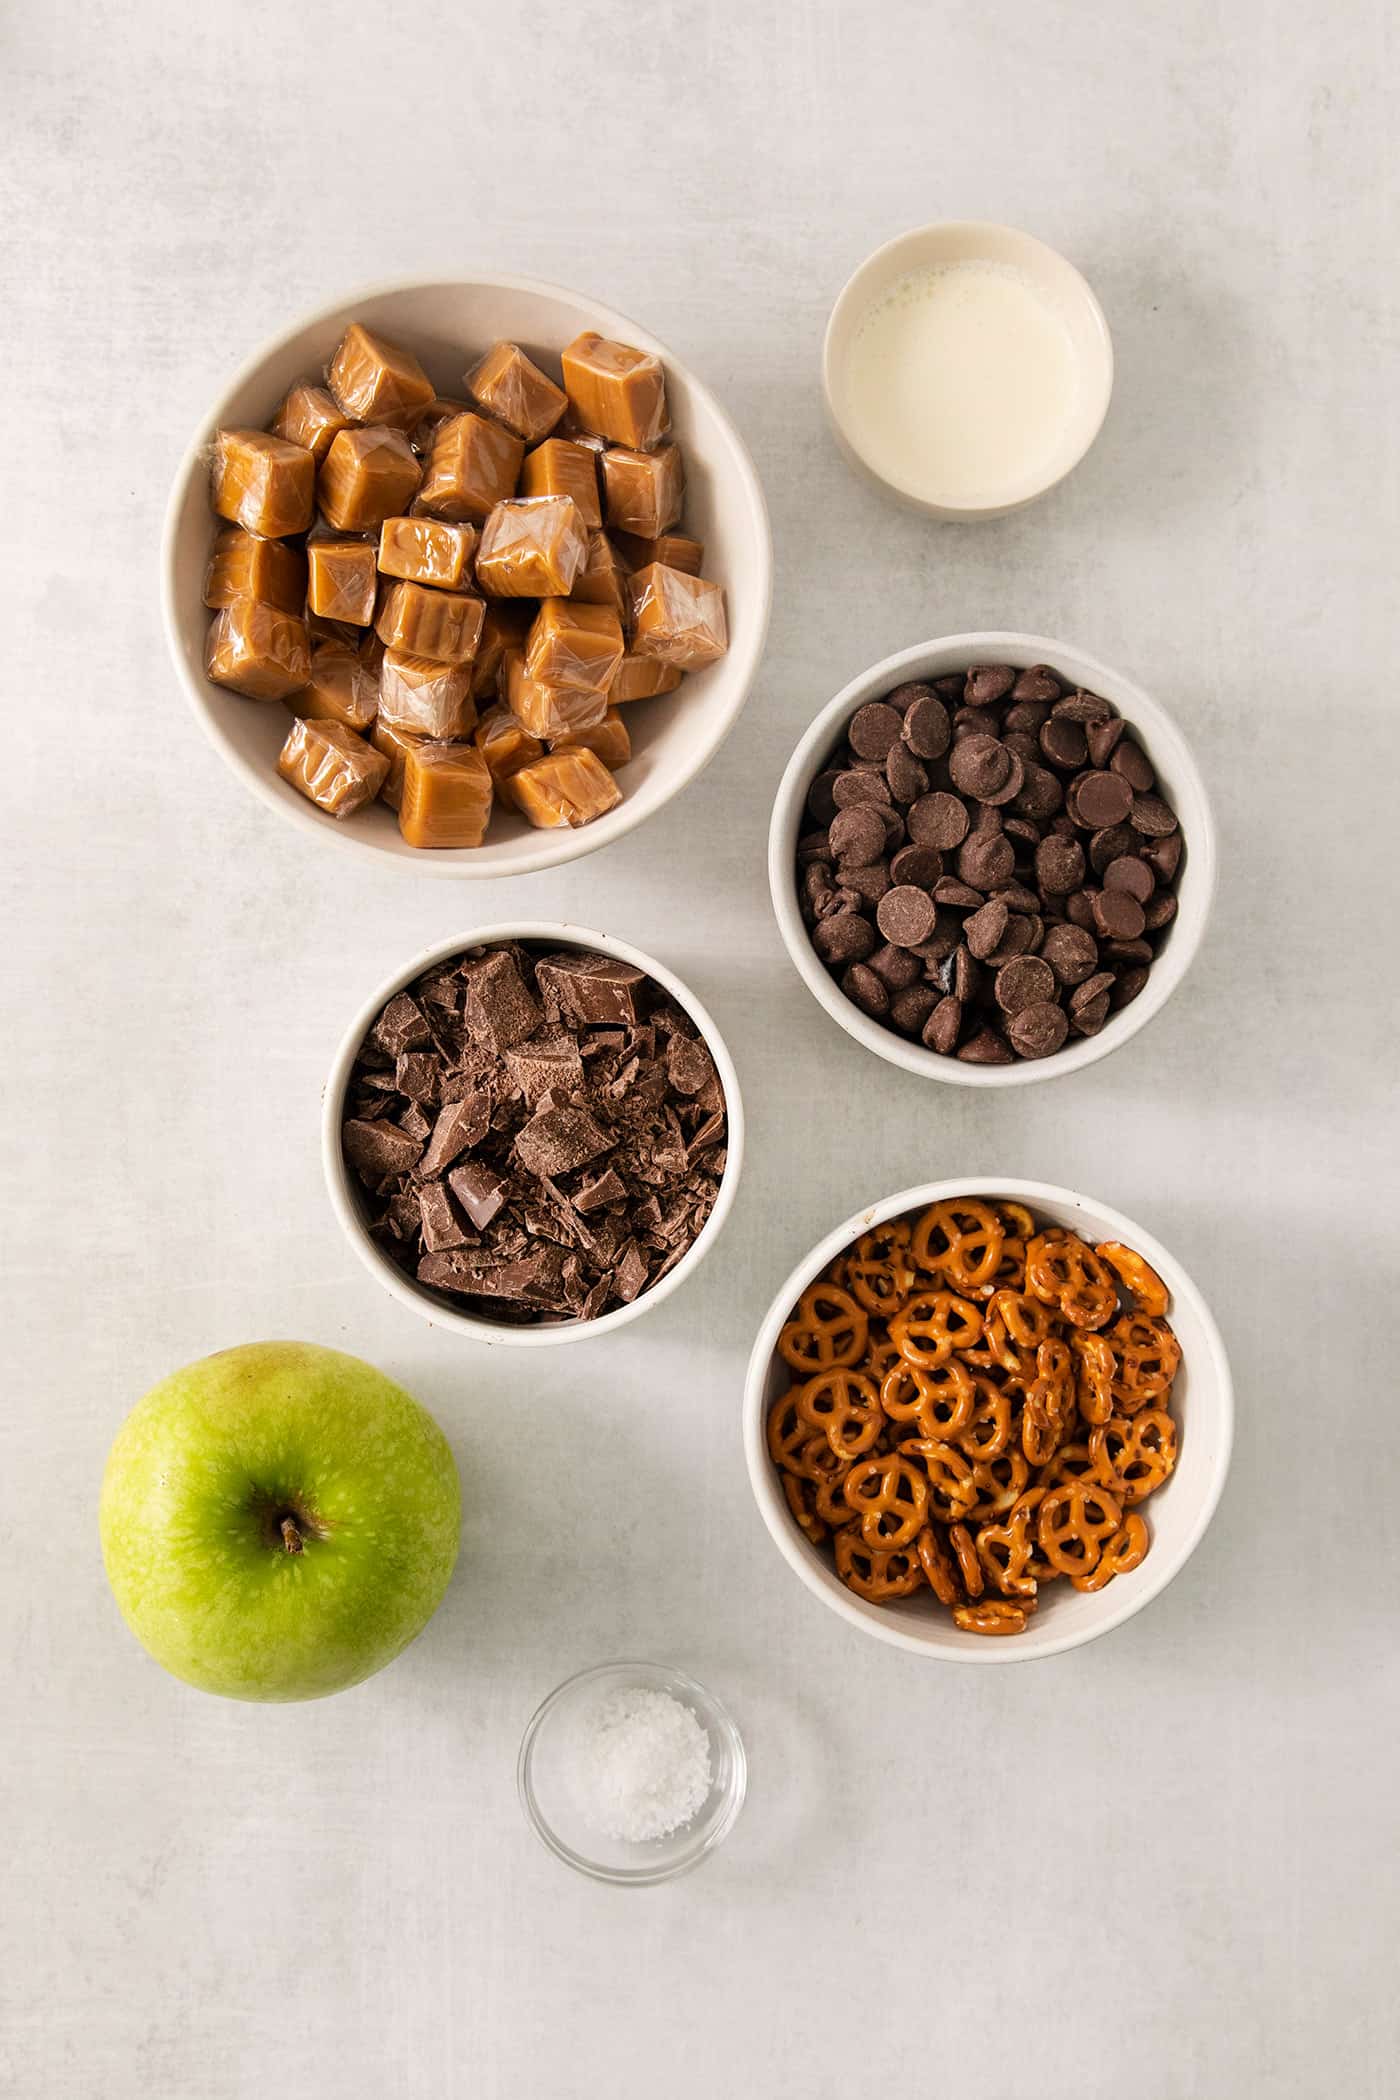 Ingredients needed to make caramel apple bark with pretzels are shown in bowls including caramels, chocolate chips, pretzels, and an apple.